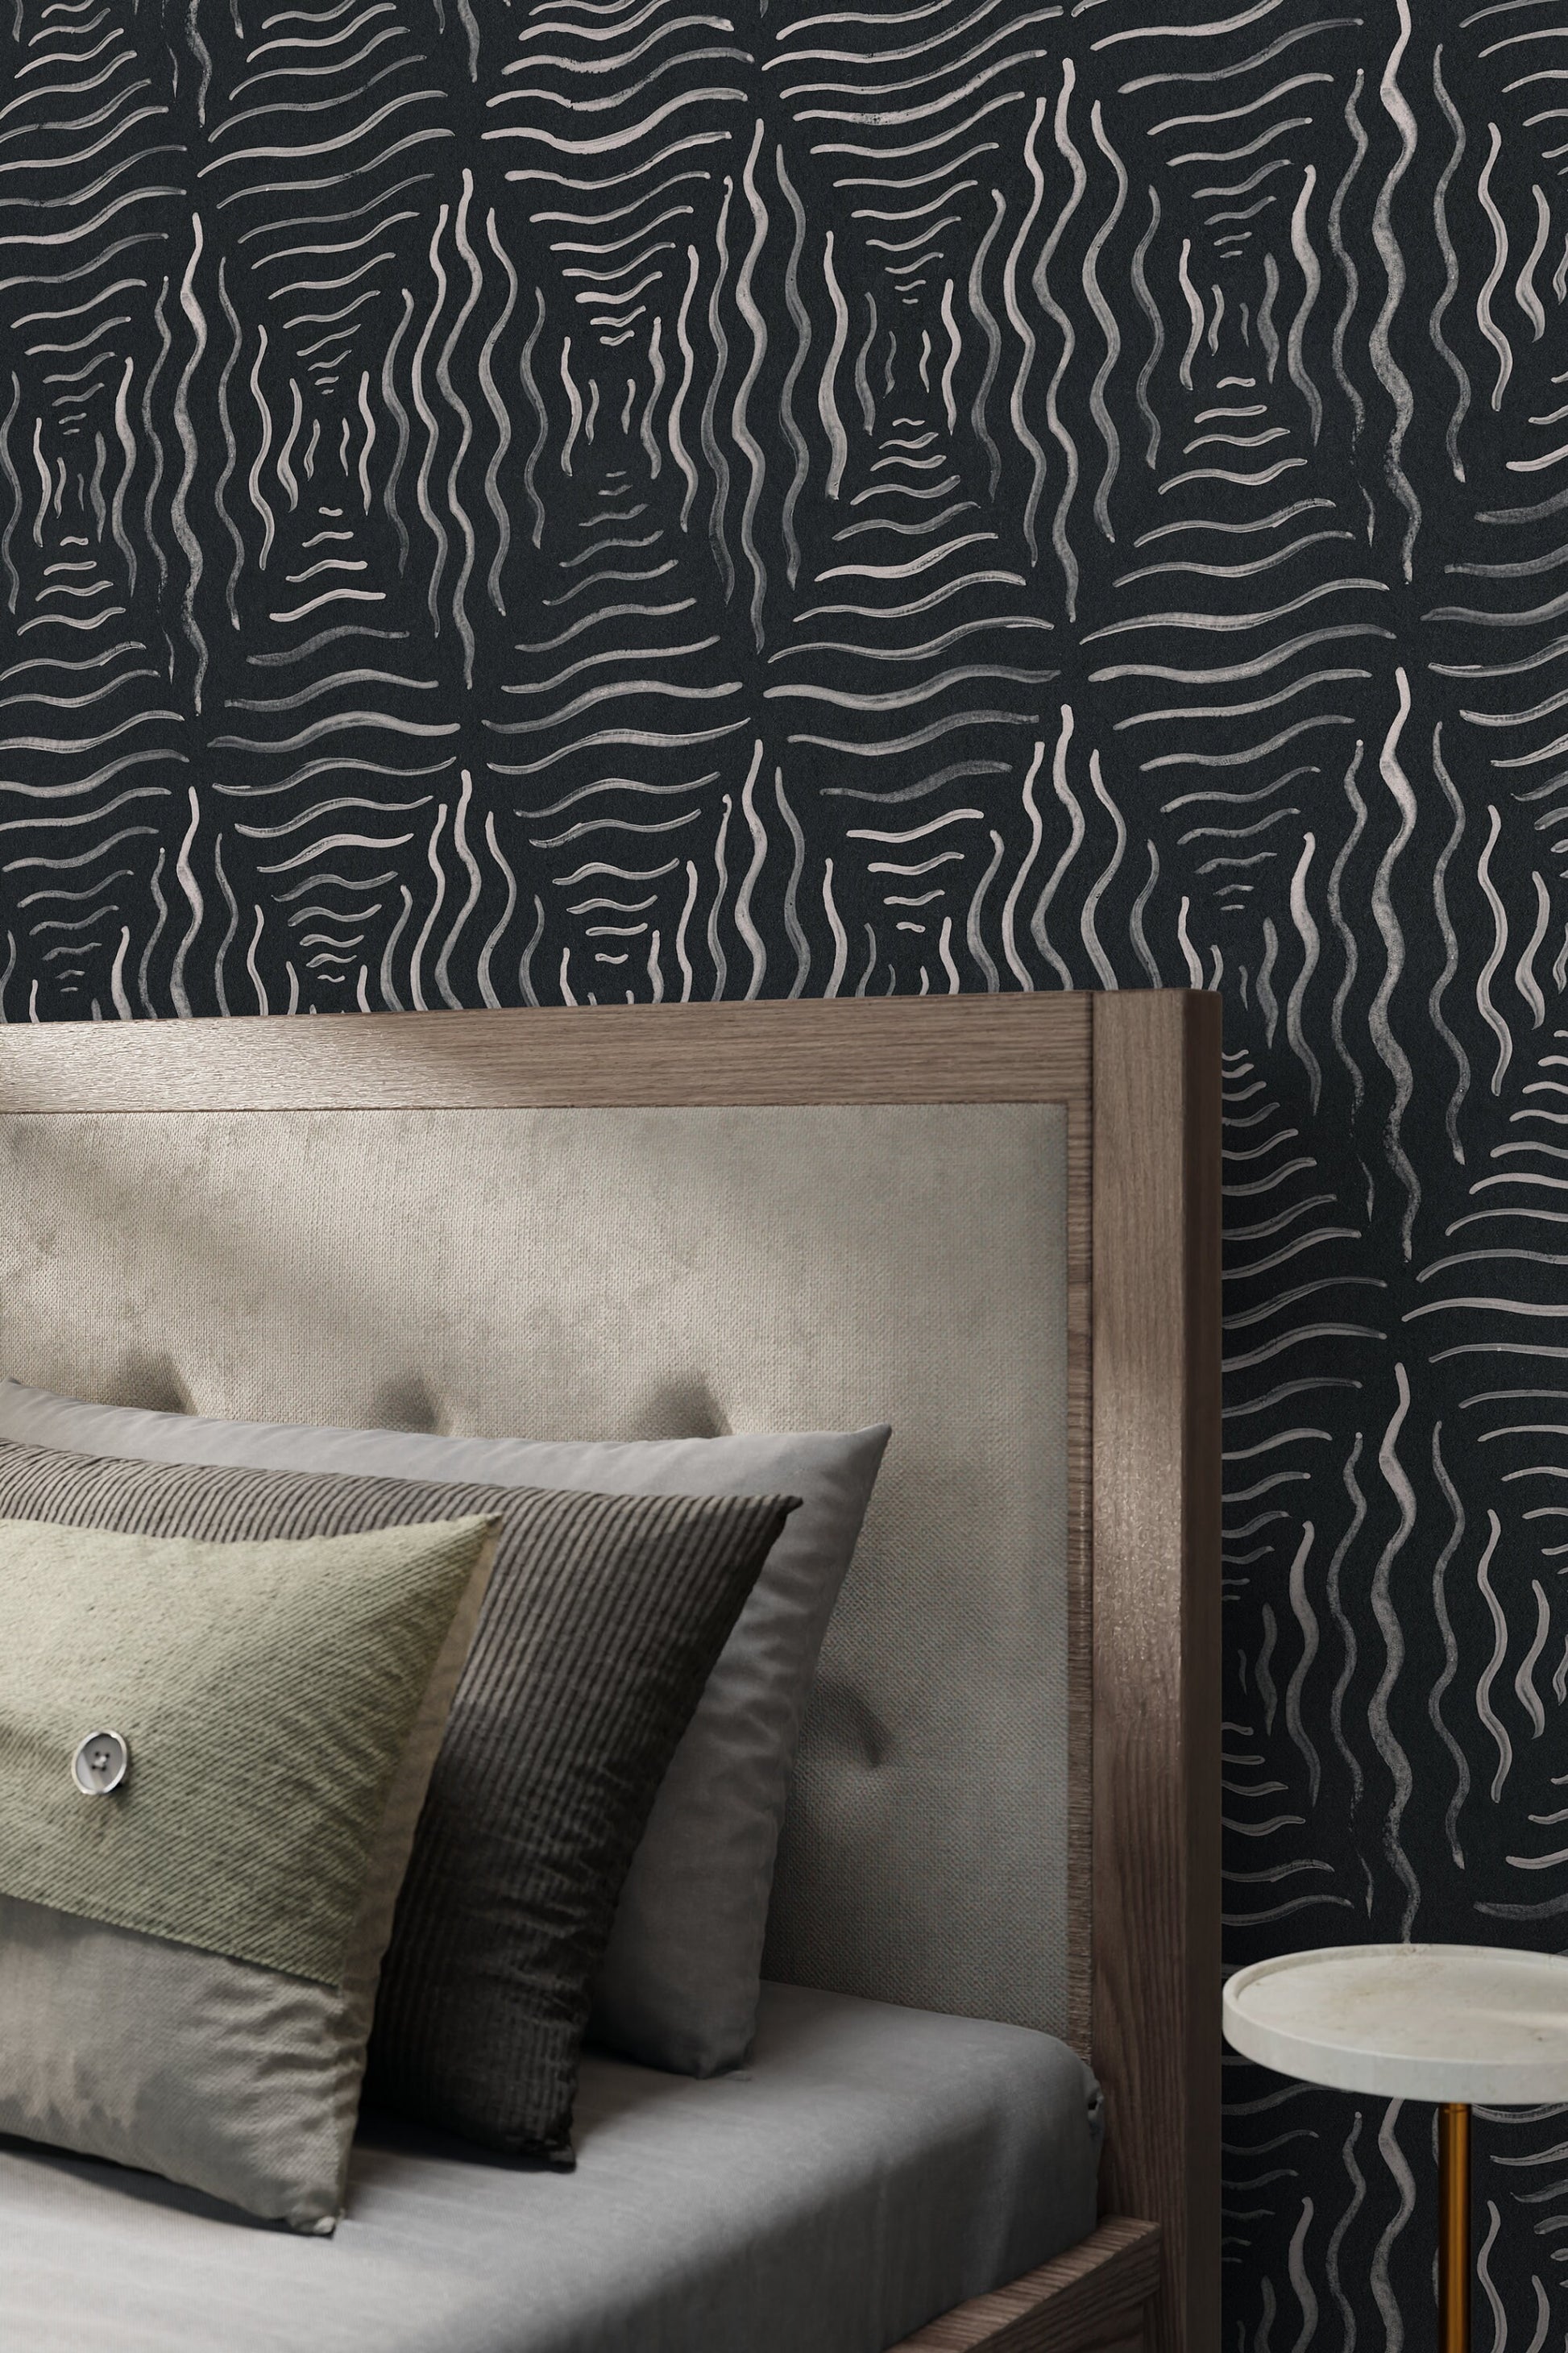 Black and Gray Abstract Wallpaper / Peel and Stick Wallpaper Removable Wallpaper Home Decor Wall Art Wall Decor Room Decor - C761